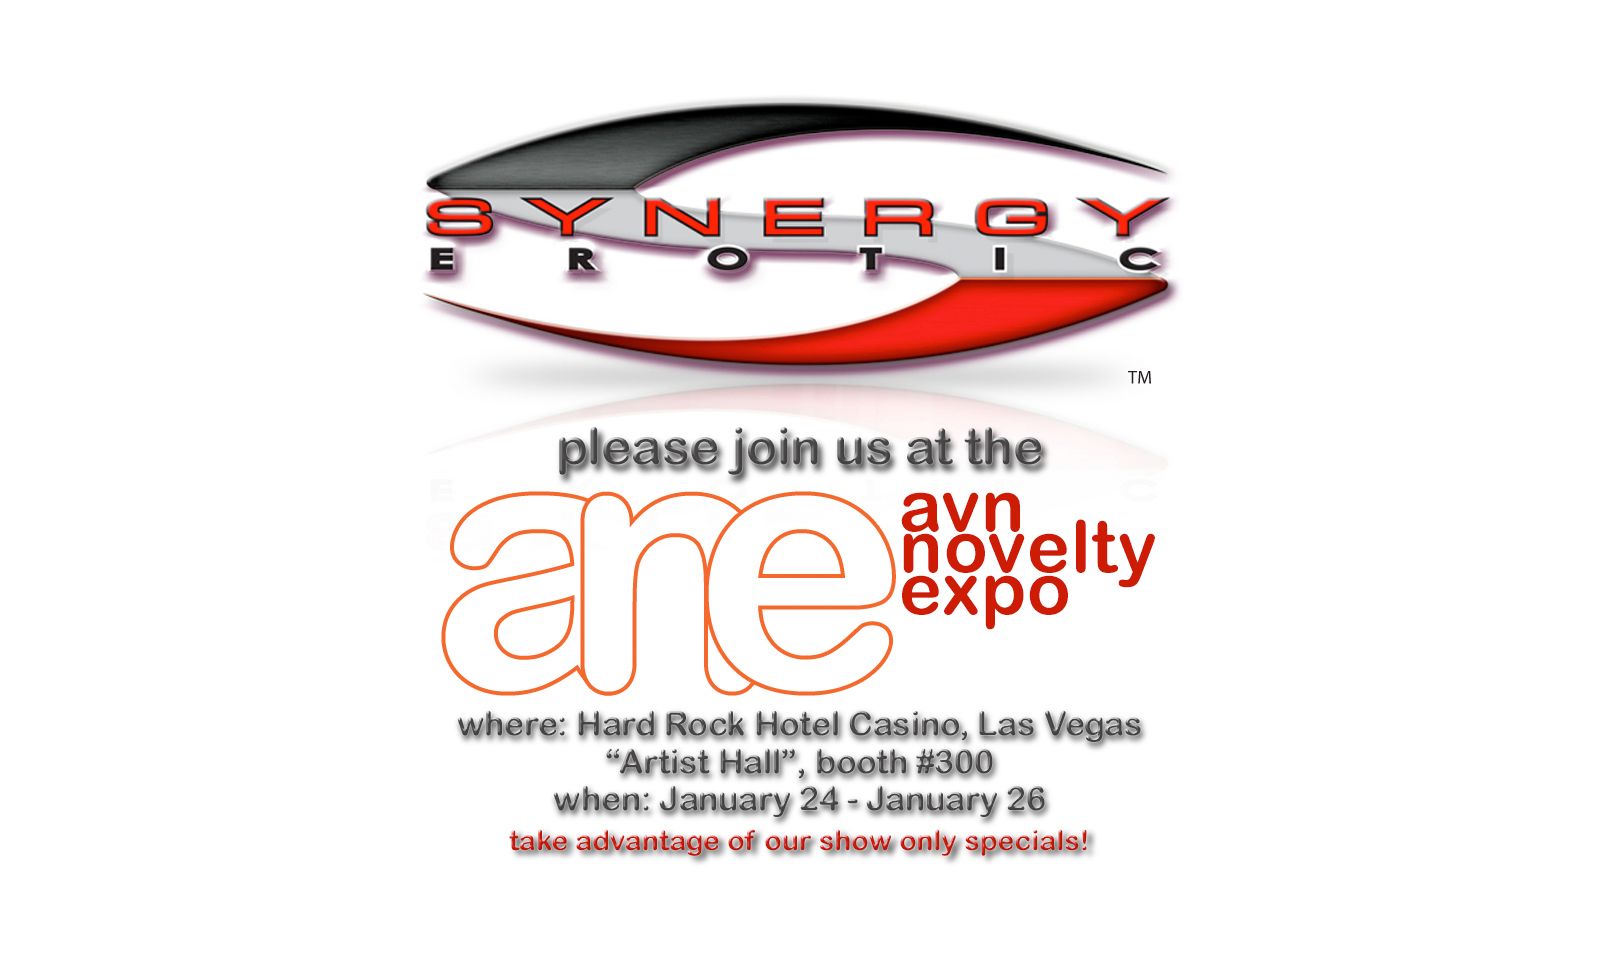 Synergy Erotic Exhibiting at ANE